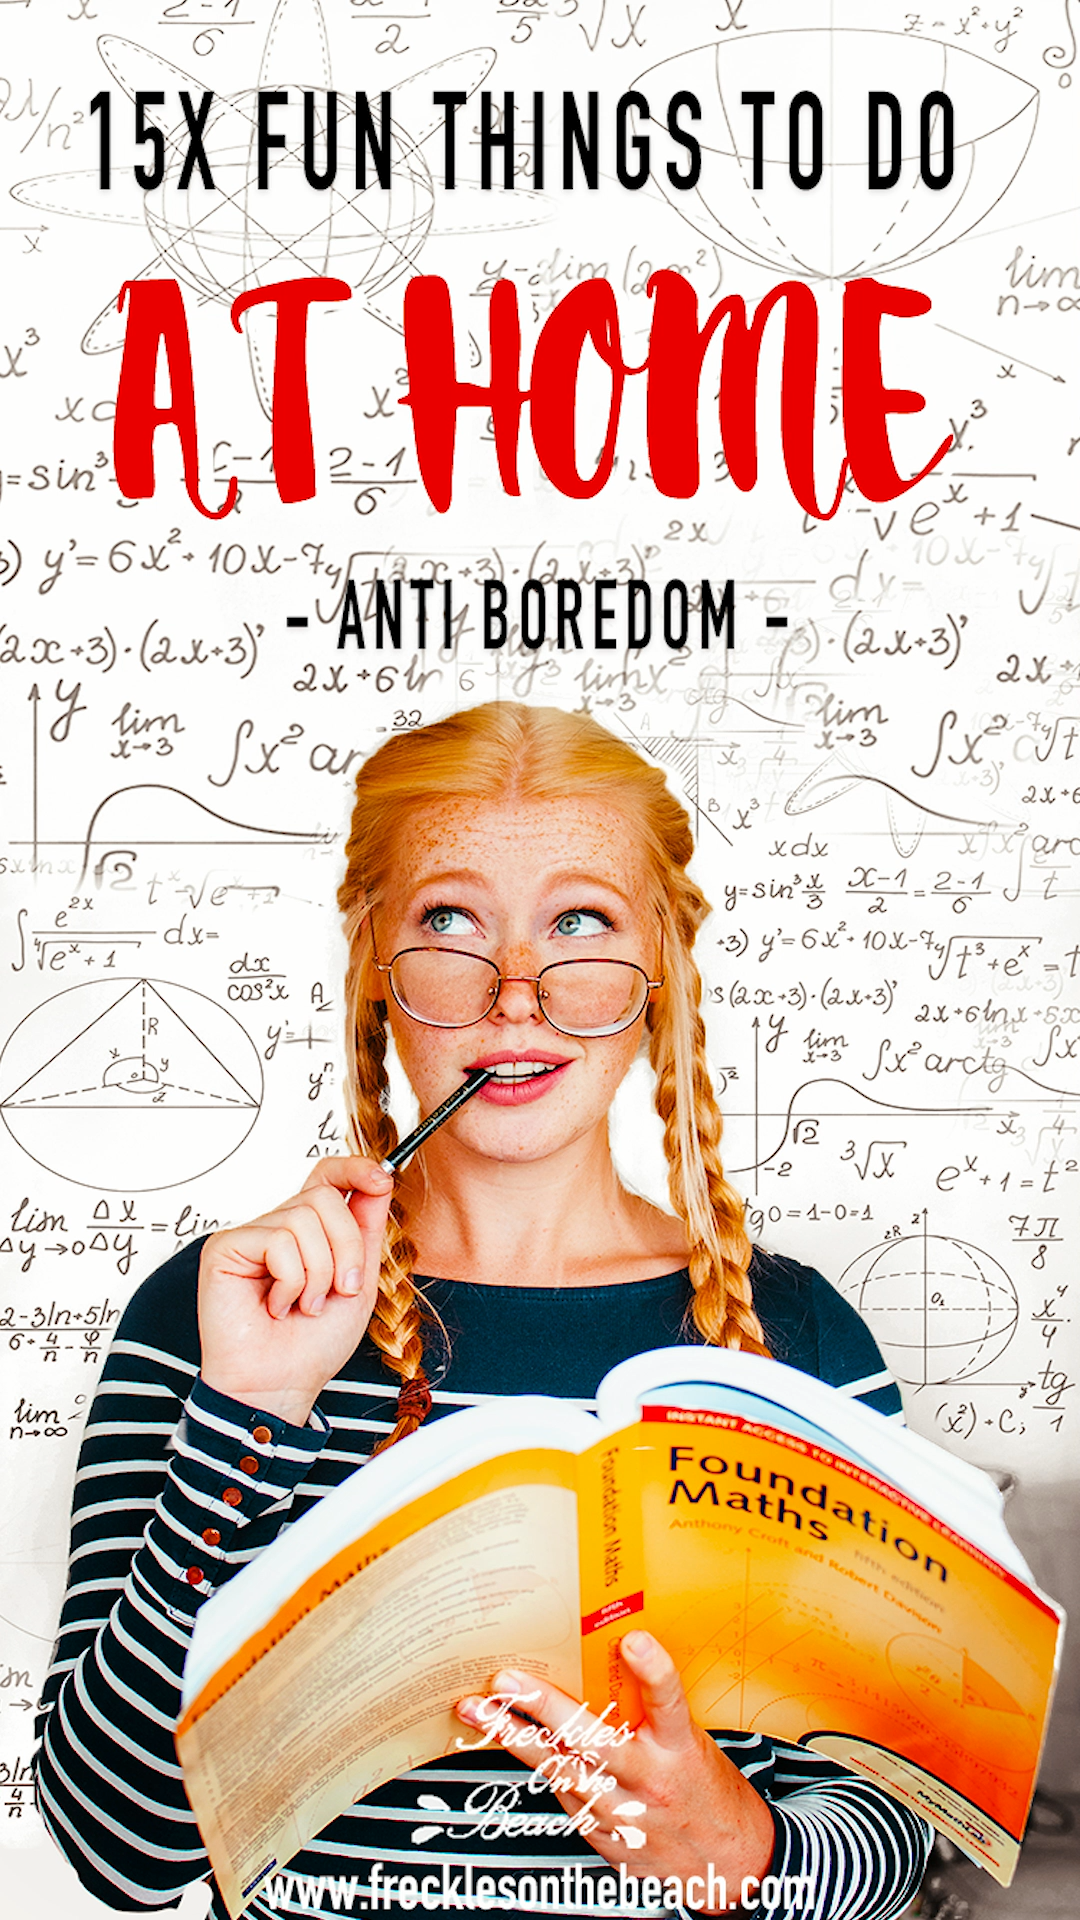 15X FUN Things To Do When Bored At Home Alone - Things To Do In Quarintine For Teens, Kids & Adults -   19 diy To Do When Bored girls ideas